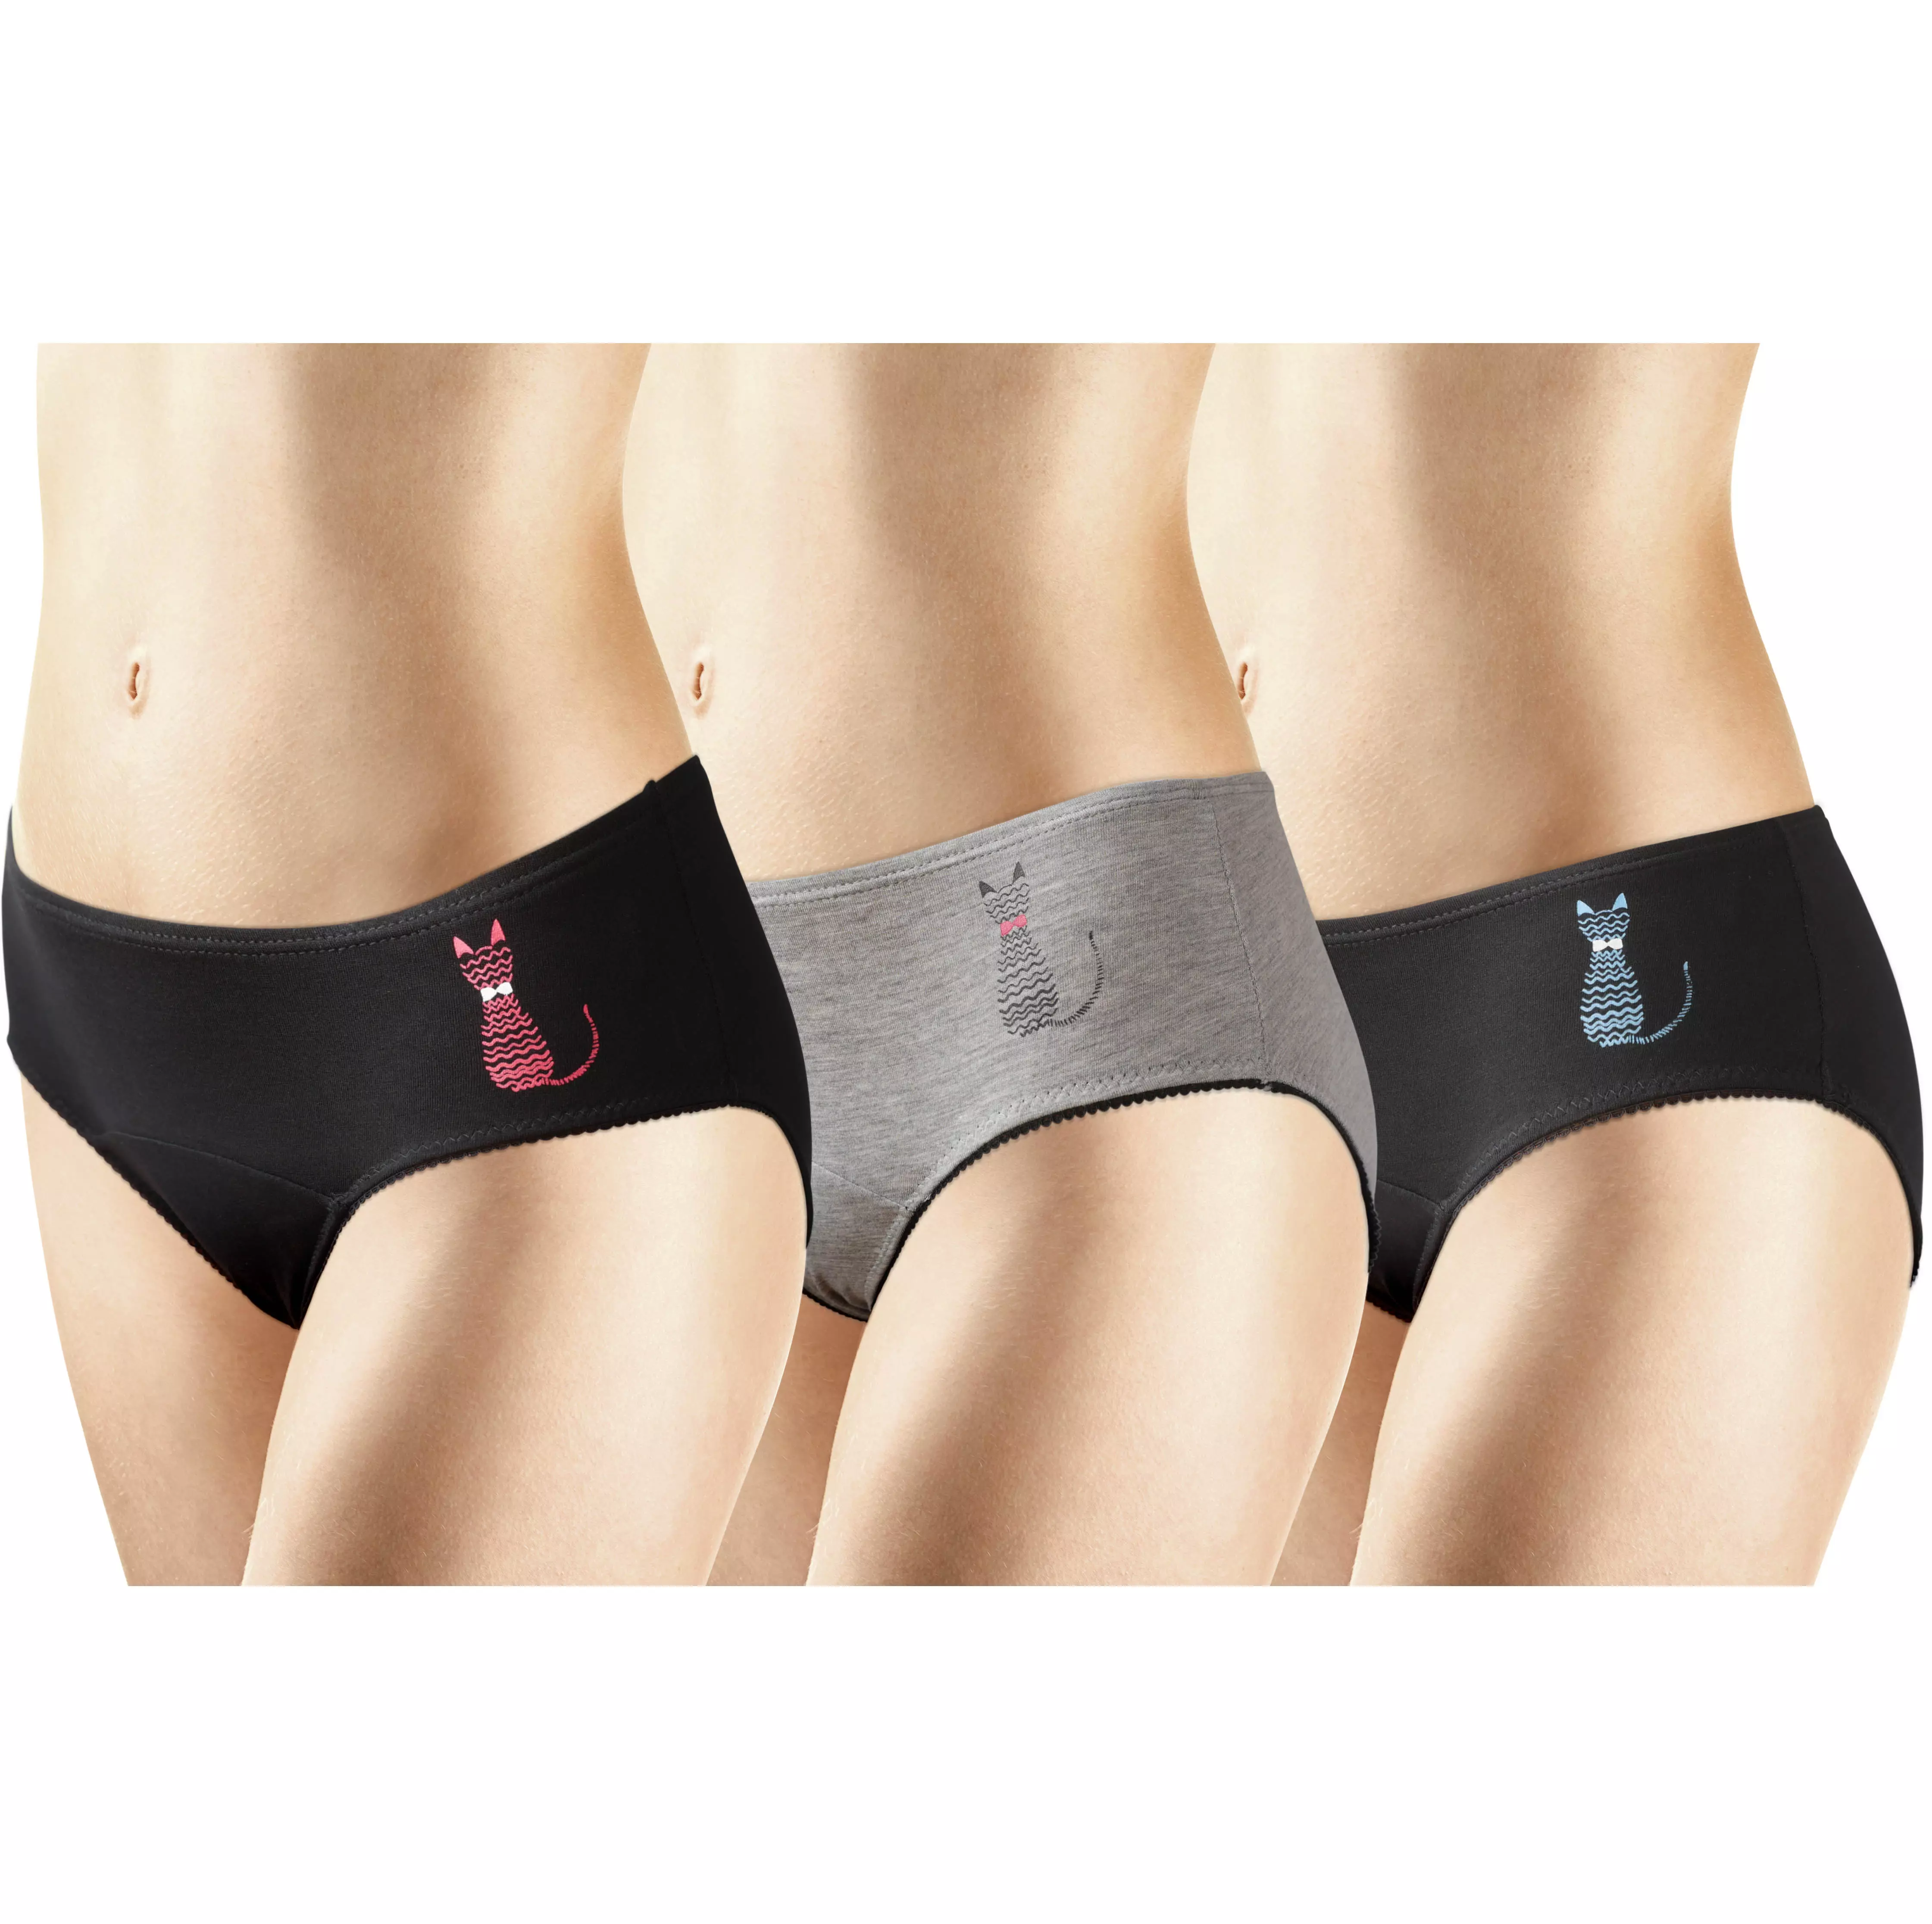 Natratouch Reusable Washable Incontinence Underwear